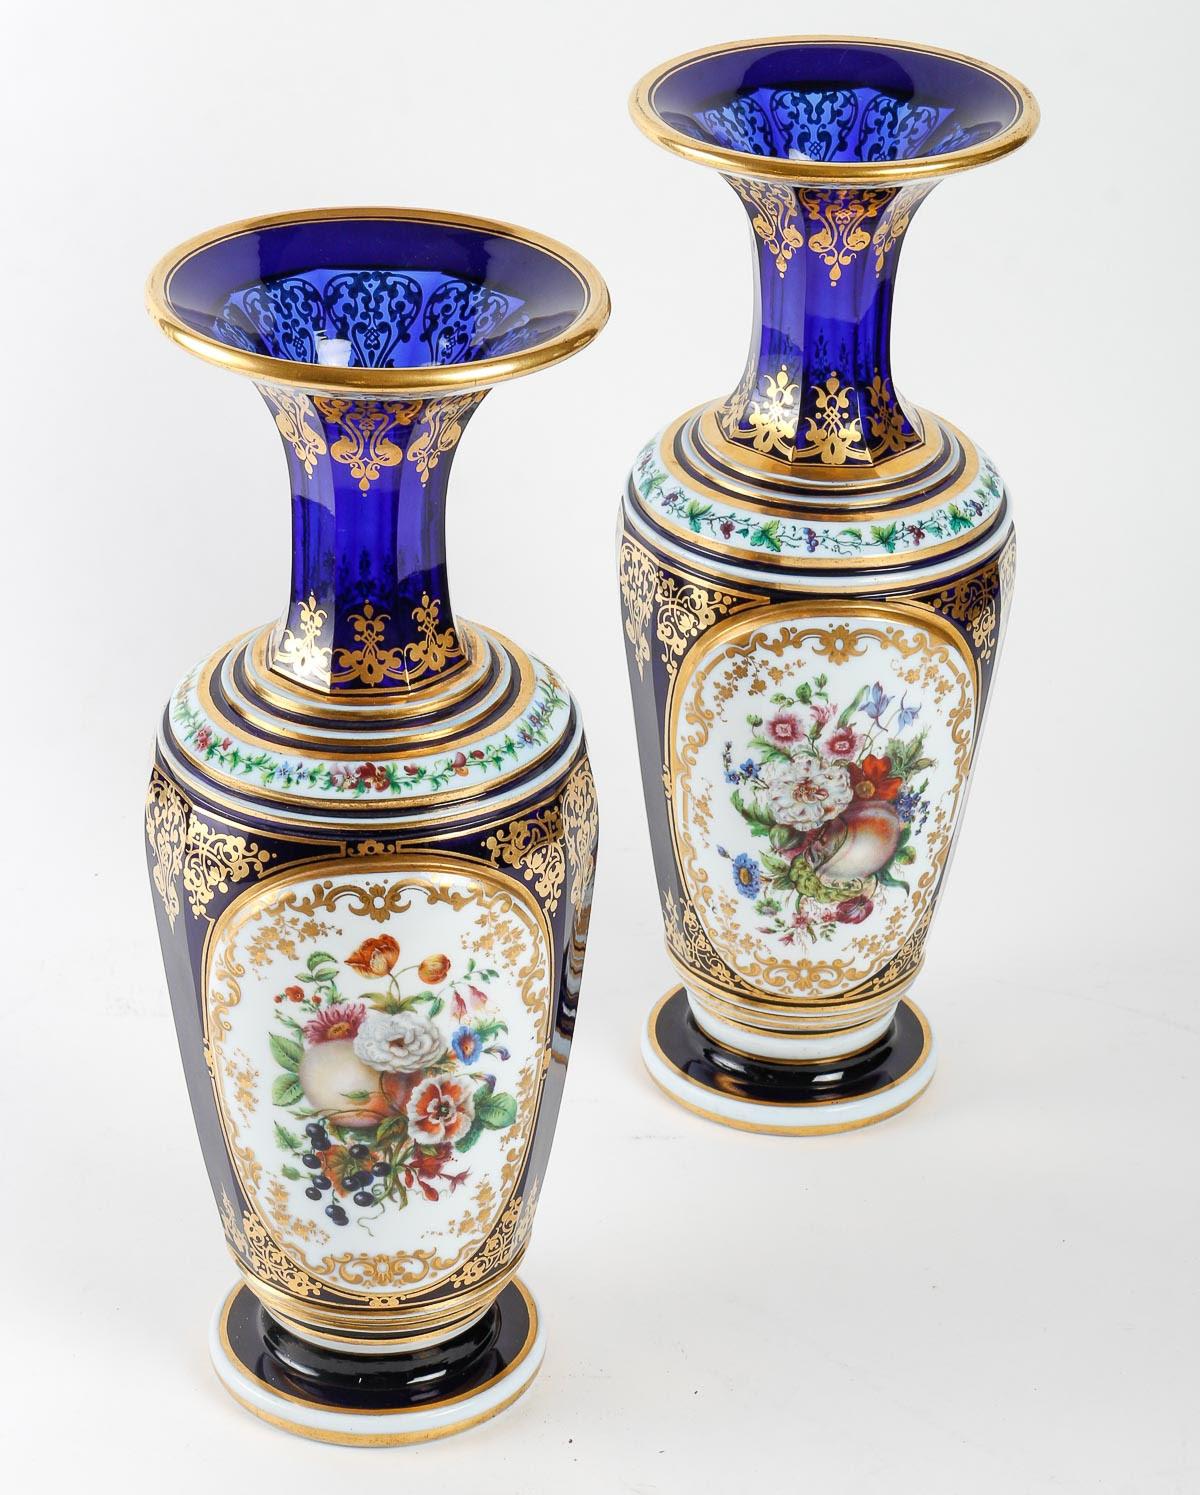 Pair of Baccarat crystal and painted opaline vases, Napoleon III period.

A pair of Baccarat crystal and opaline vases painted with floral decorations and enhanced with gold, 19th century, Napoleon III period.

H: 36cm, D: 14cm